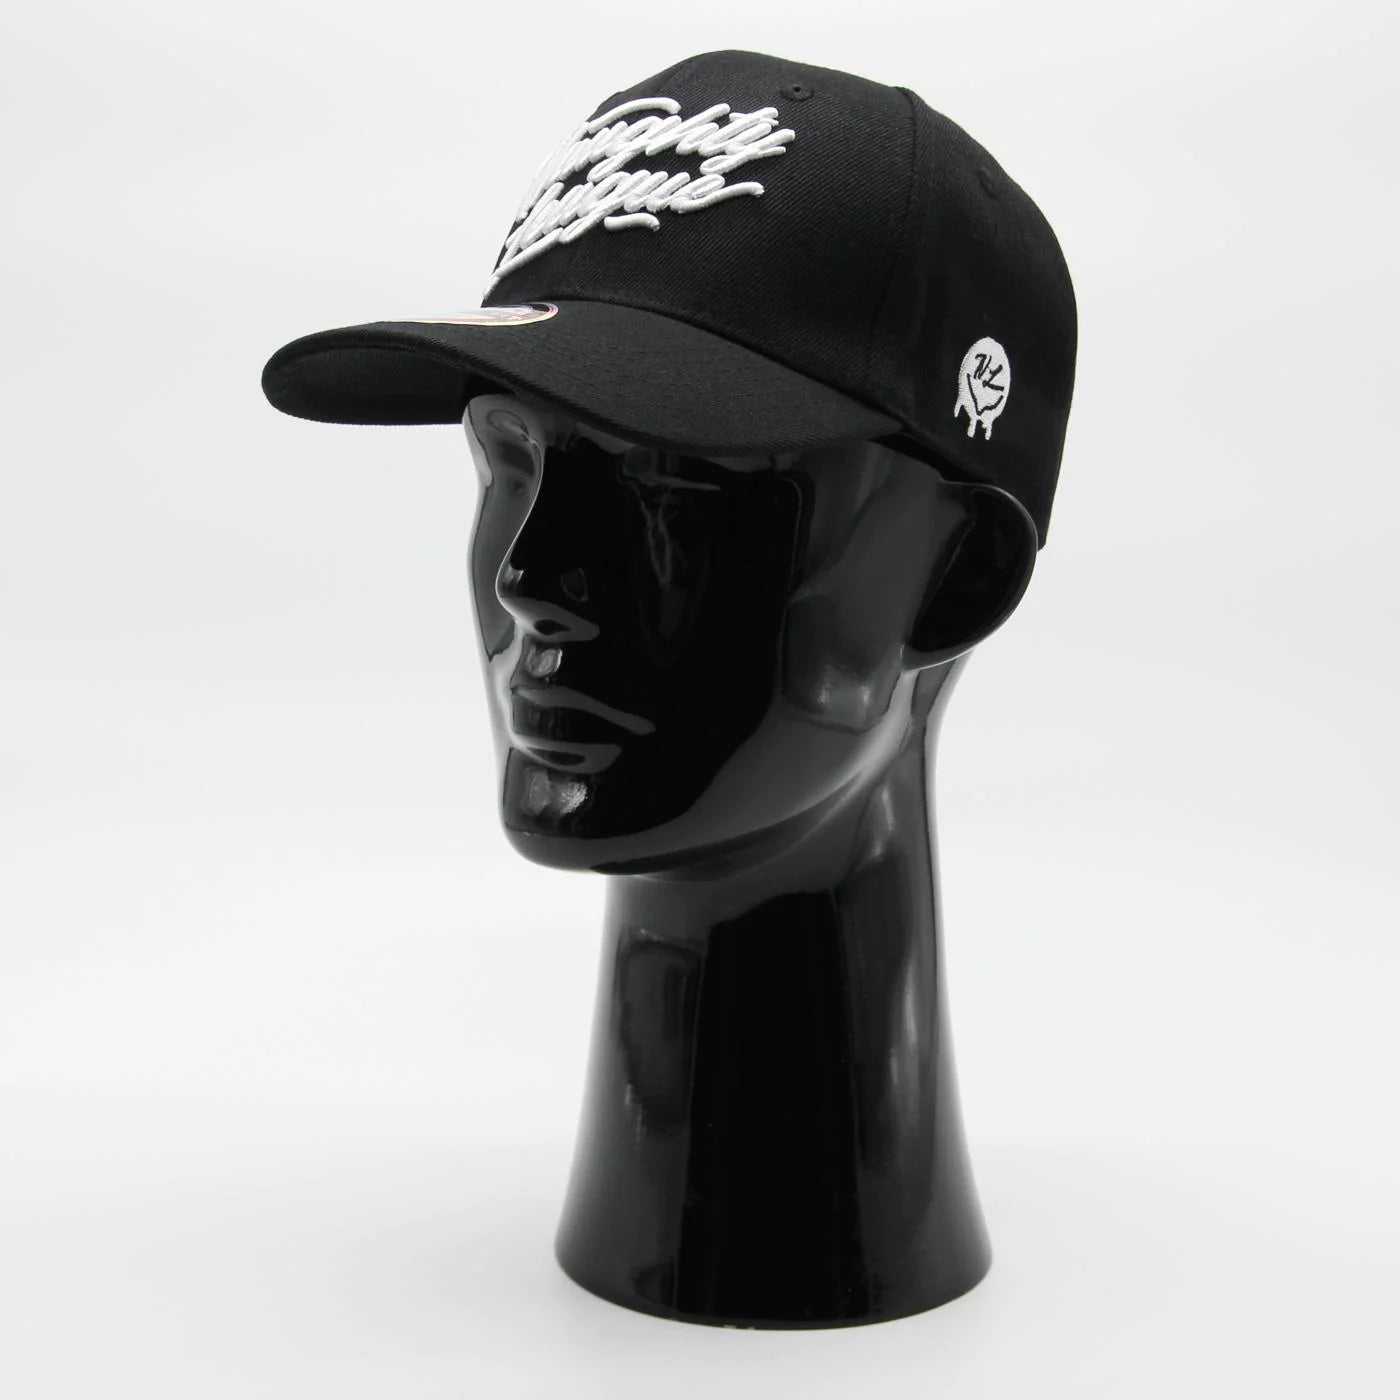 Branded Logo Curved Stretch Fitted Black/White